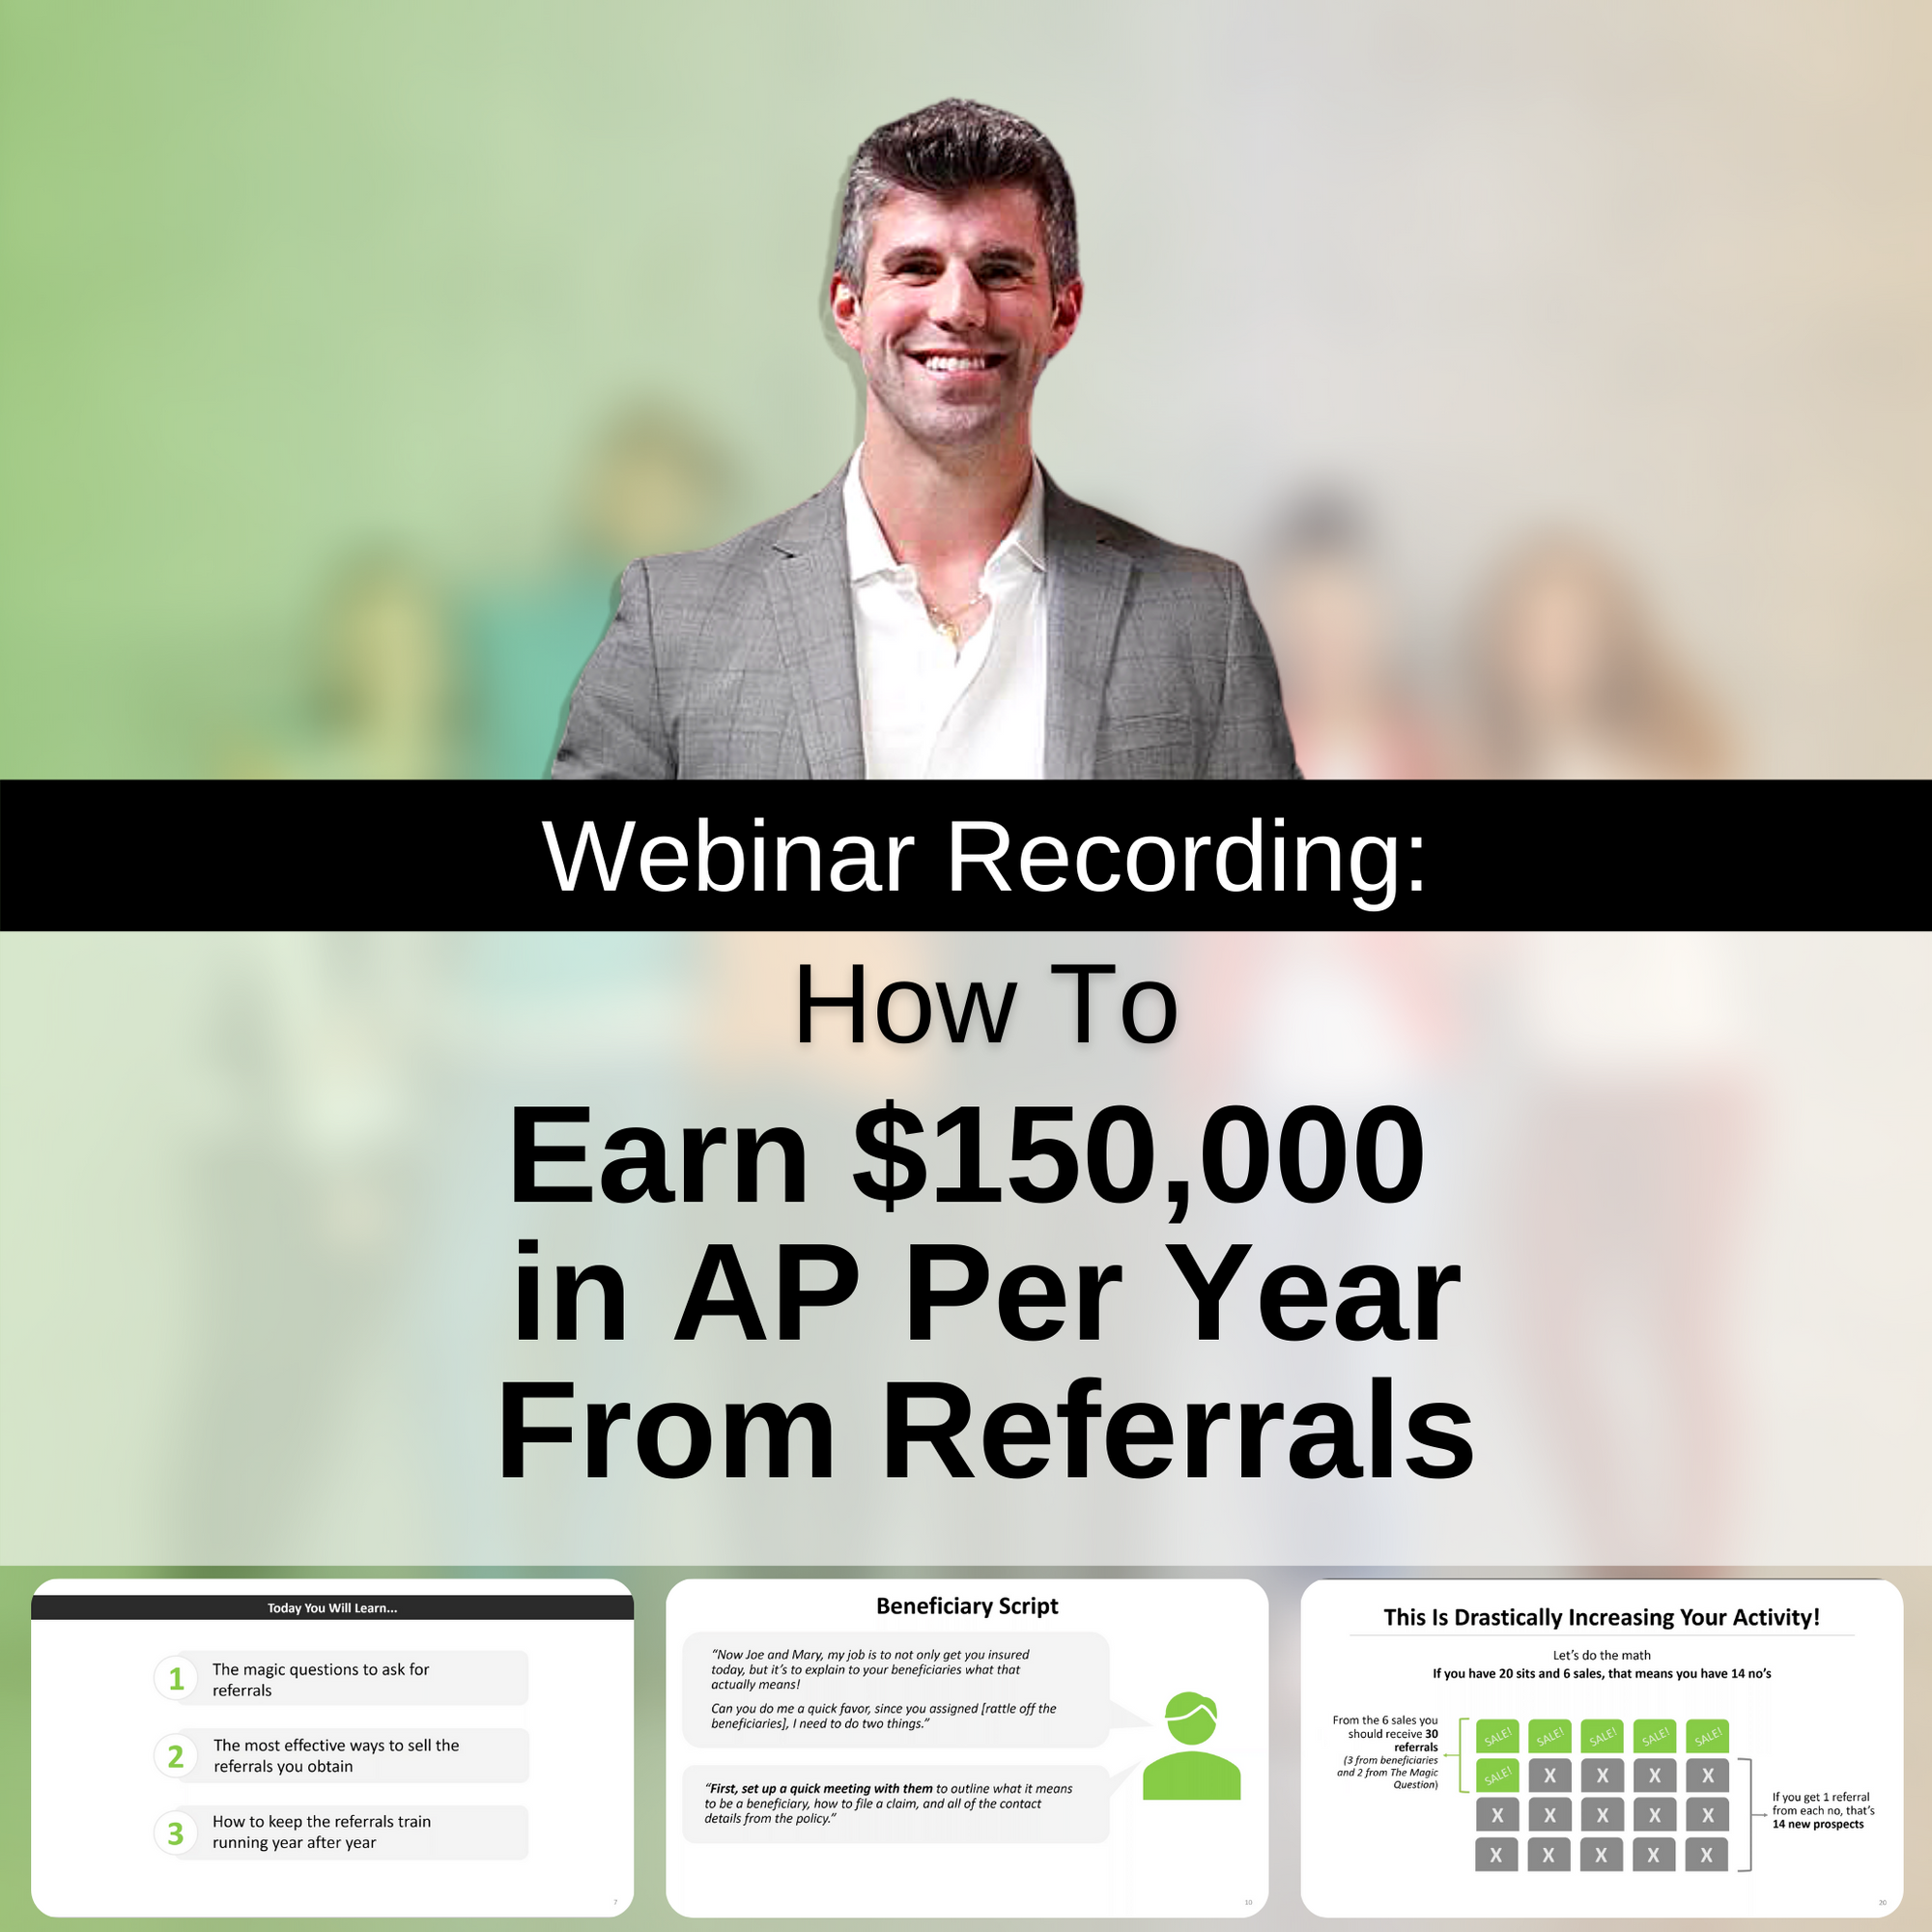 Training Video: How To Earn $150,000 in AP Per Year From Referrals